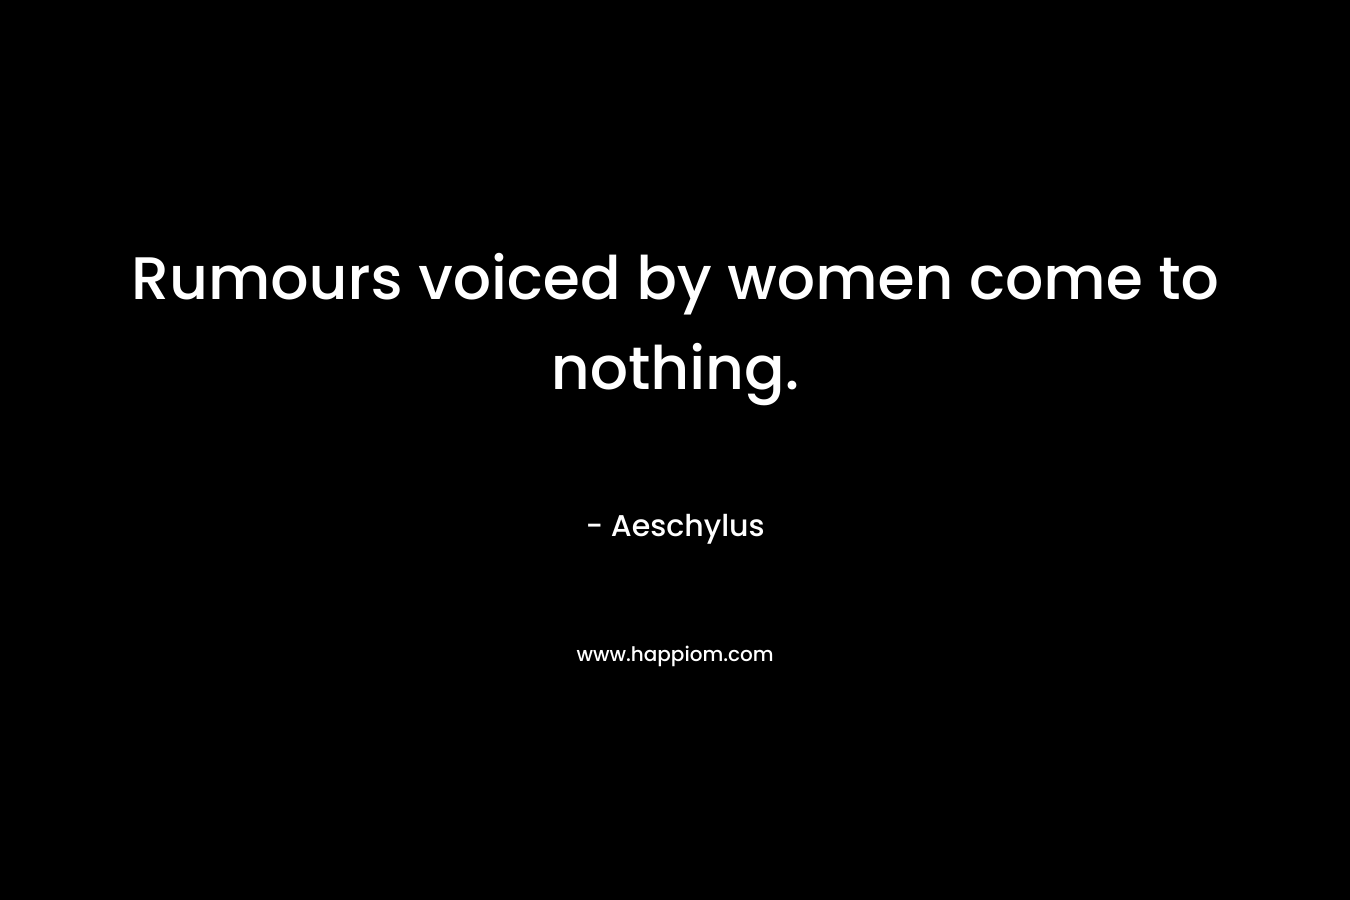 Rumours voiced by women come to nothing. – Aeschylus